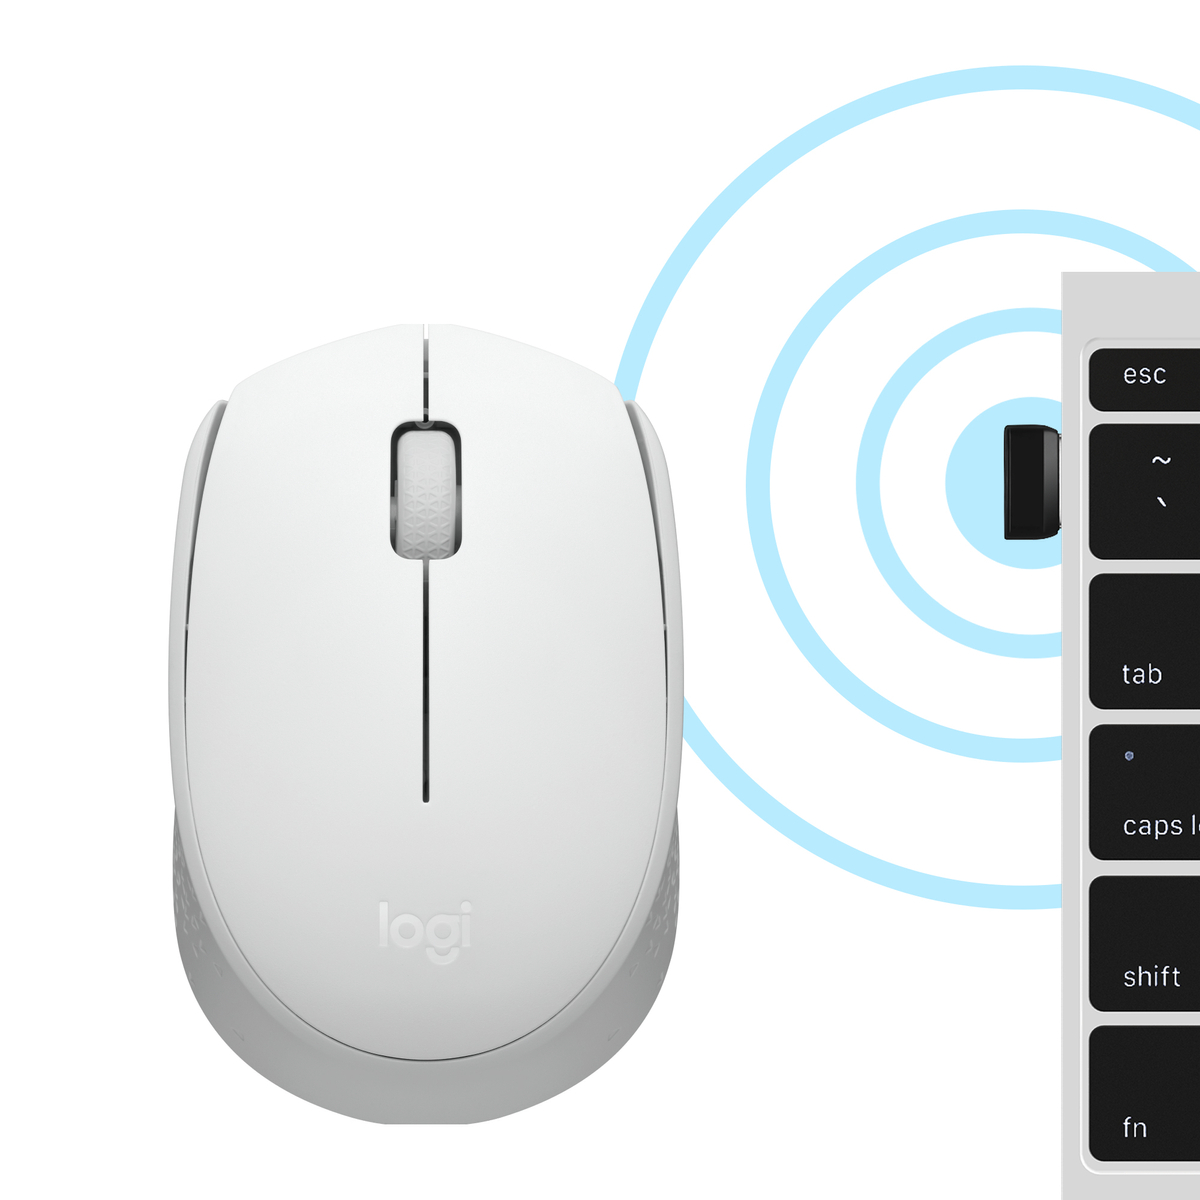 M171 Wireless Mouse - OFF WHITE